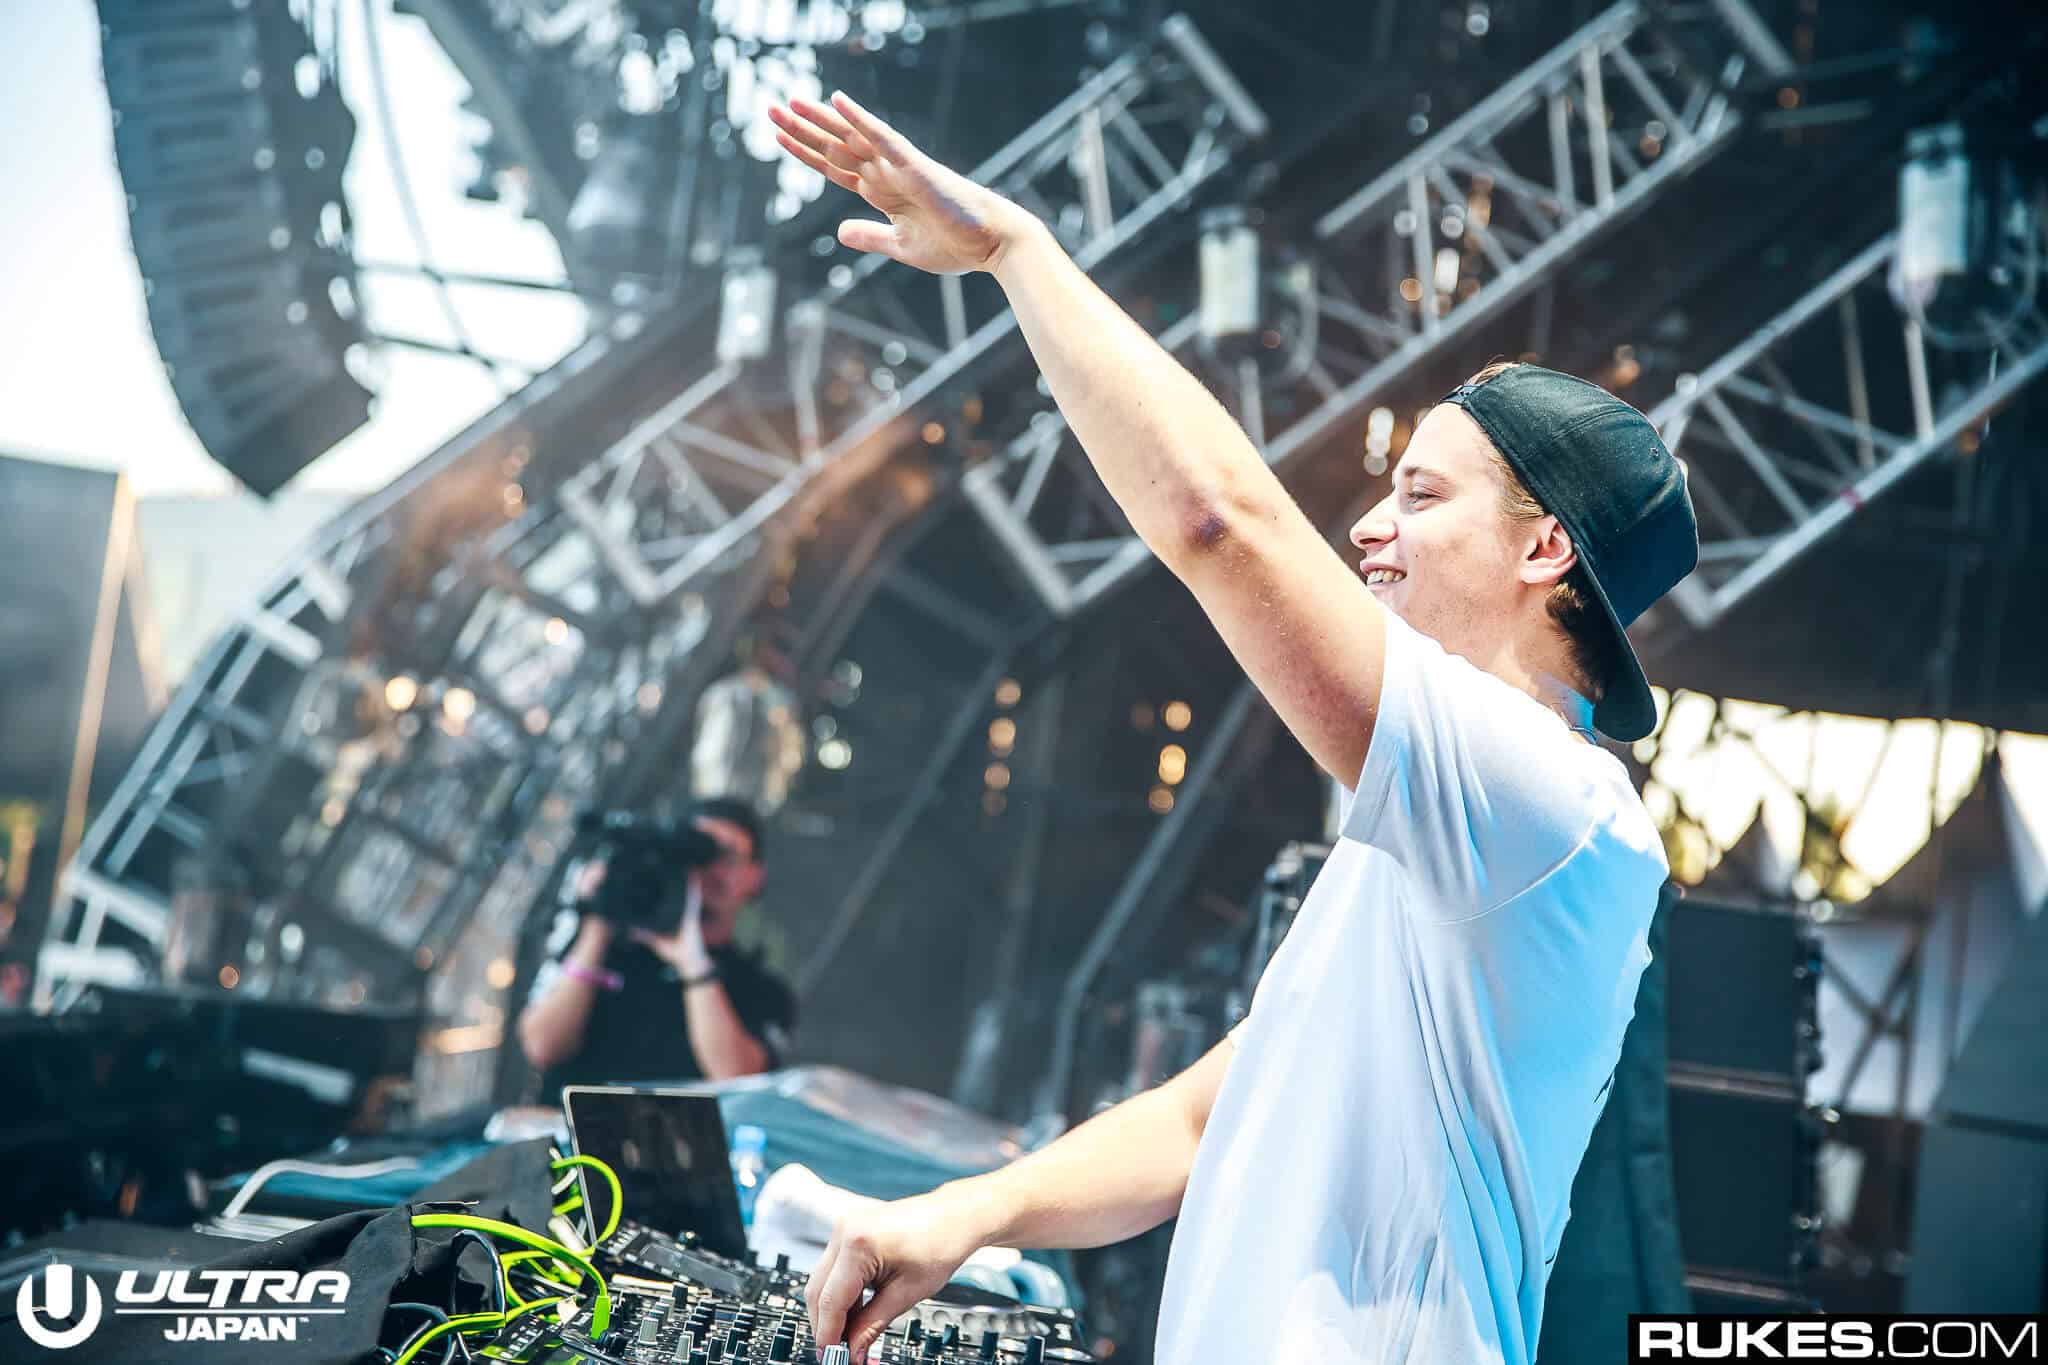 Kygo brightens up Covid-19 days with uplifting new vocal track ‘Freedom’